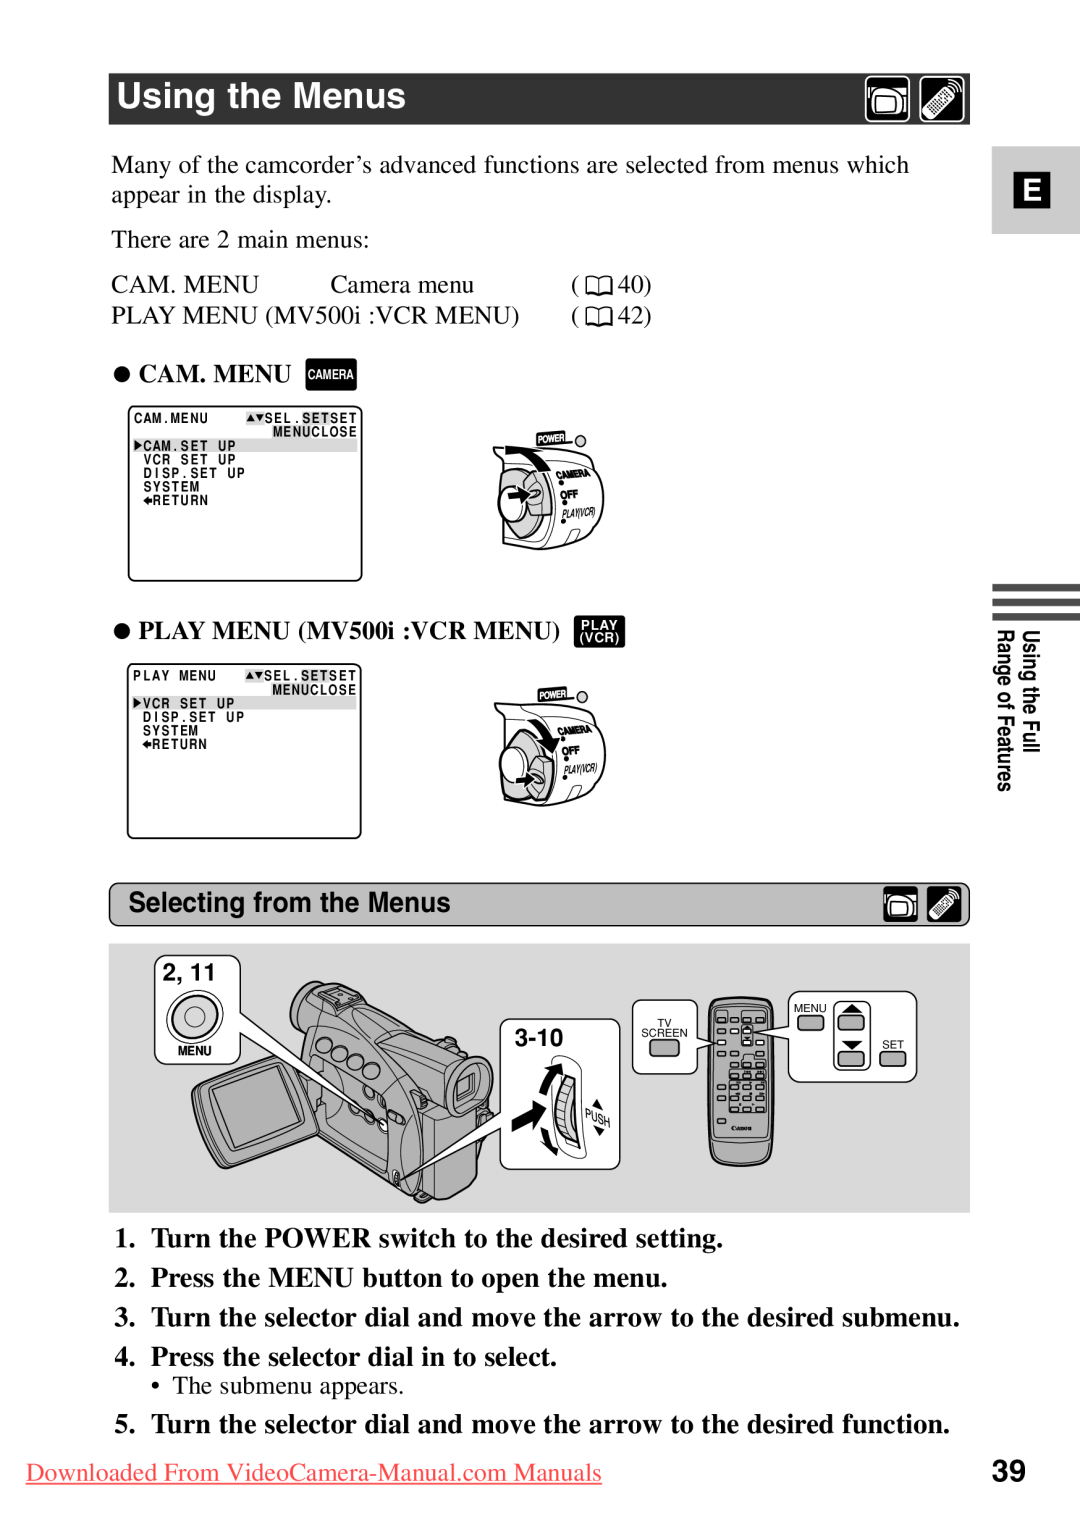 Canon 7561A001, MV500i Using the Menus, Selecting from the Menus, Turn the POWER switch to the desired setting 